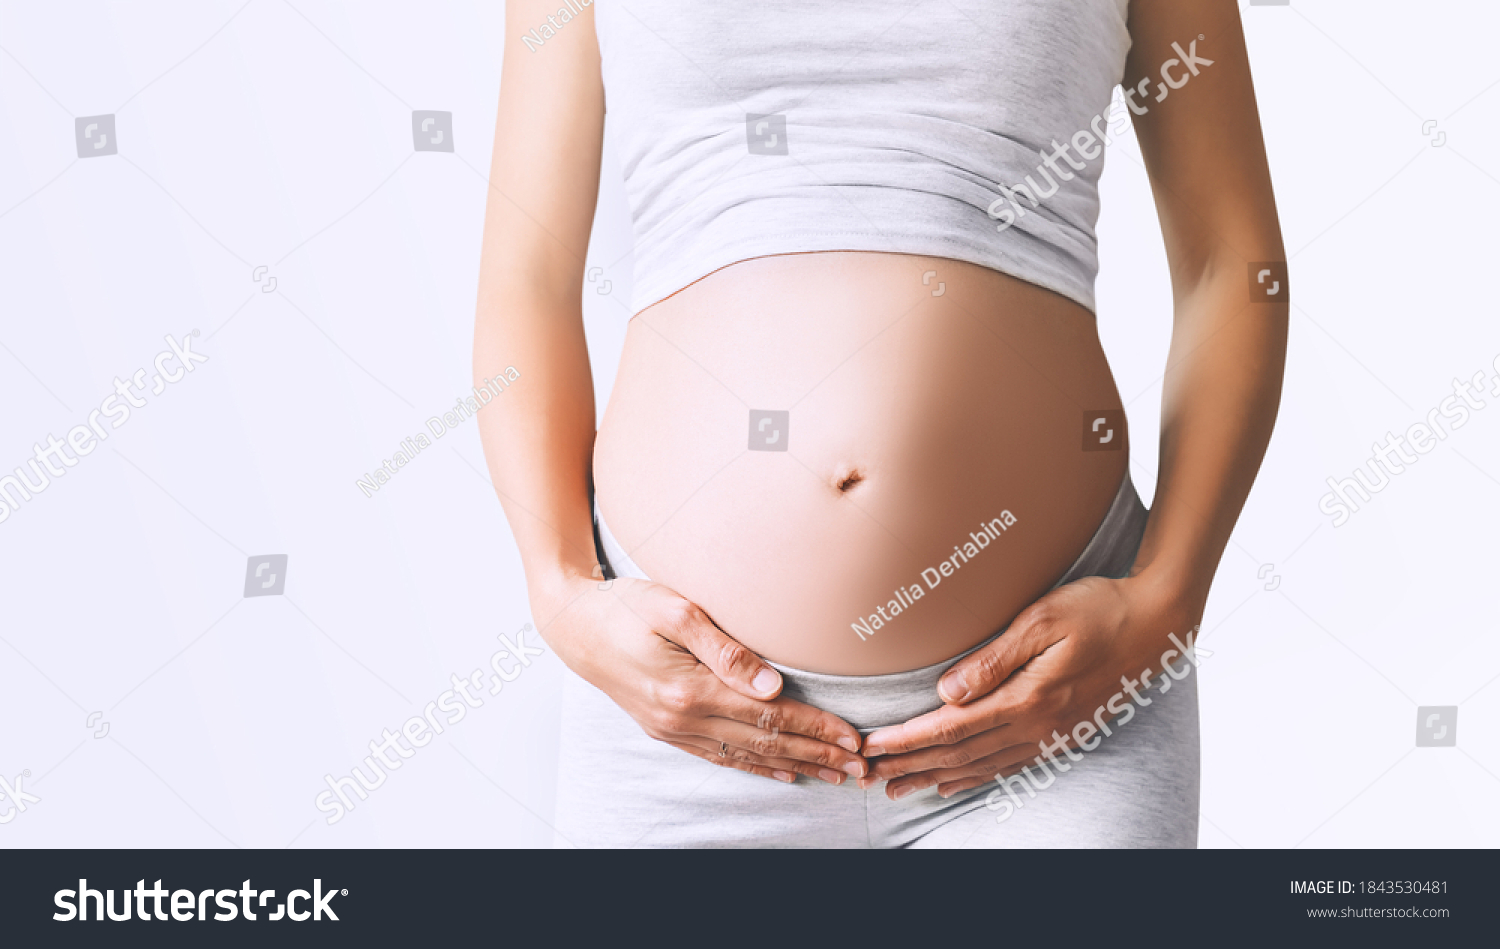 Pregnant woman holds hands on her belly on white background, close-up. Beautiful photo of pregnancy. Mother waiting for baby. Women prepare for maternity. Concept of prenatal period, maternal health. #1843530481